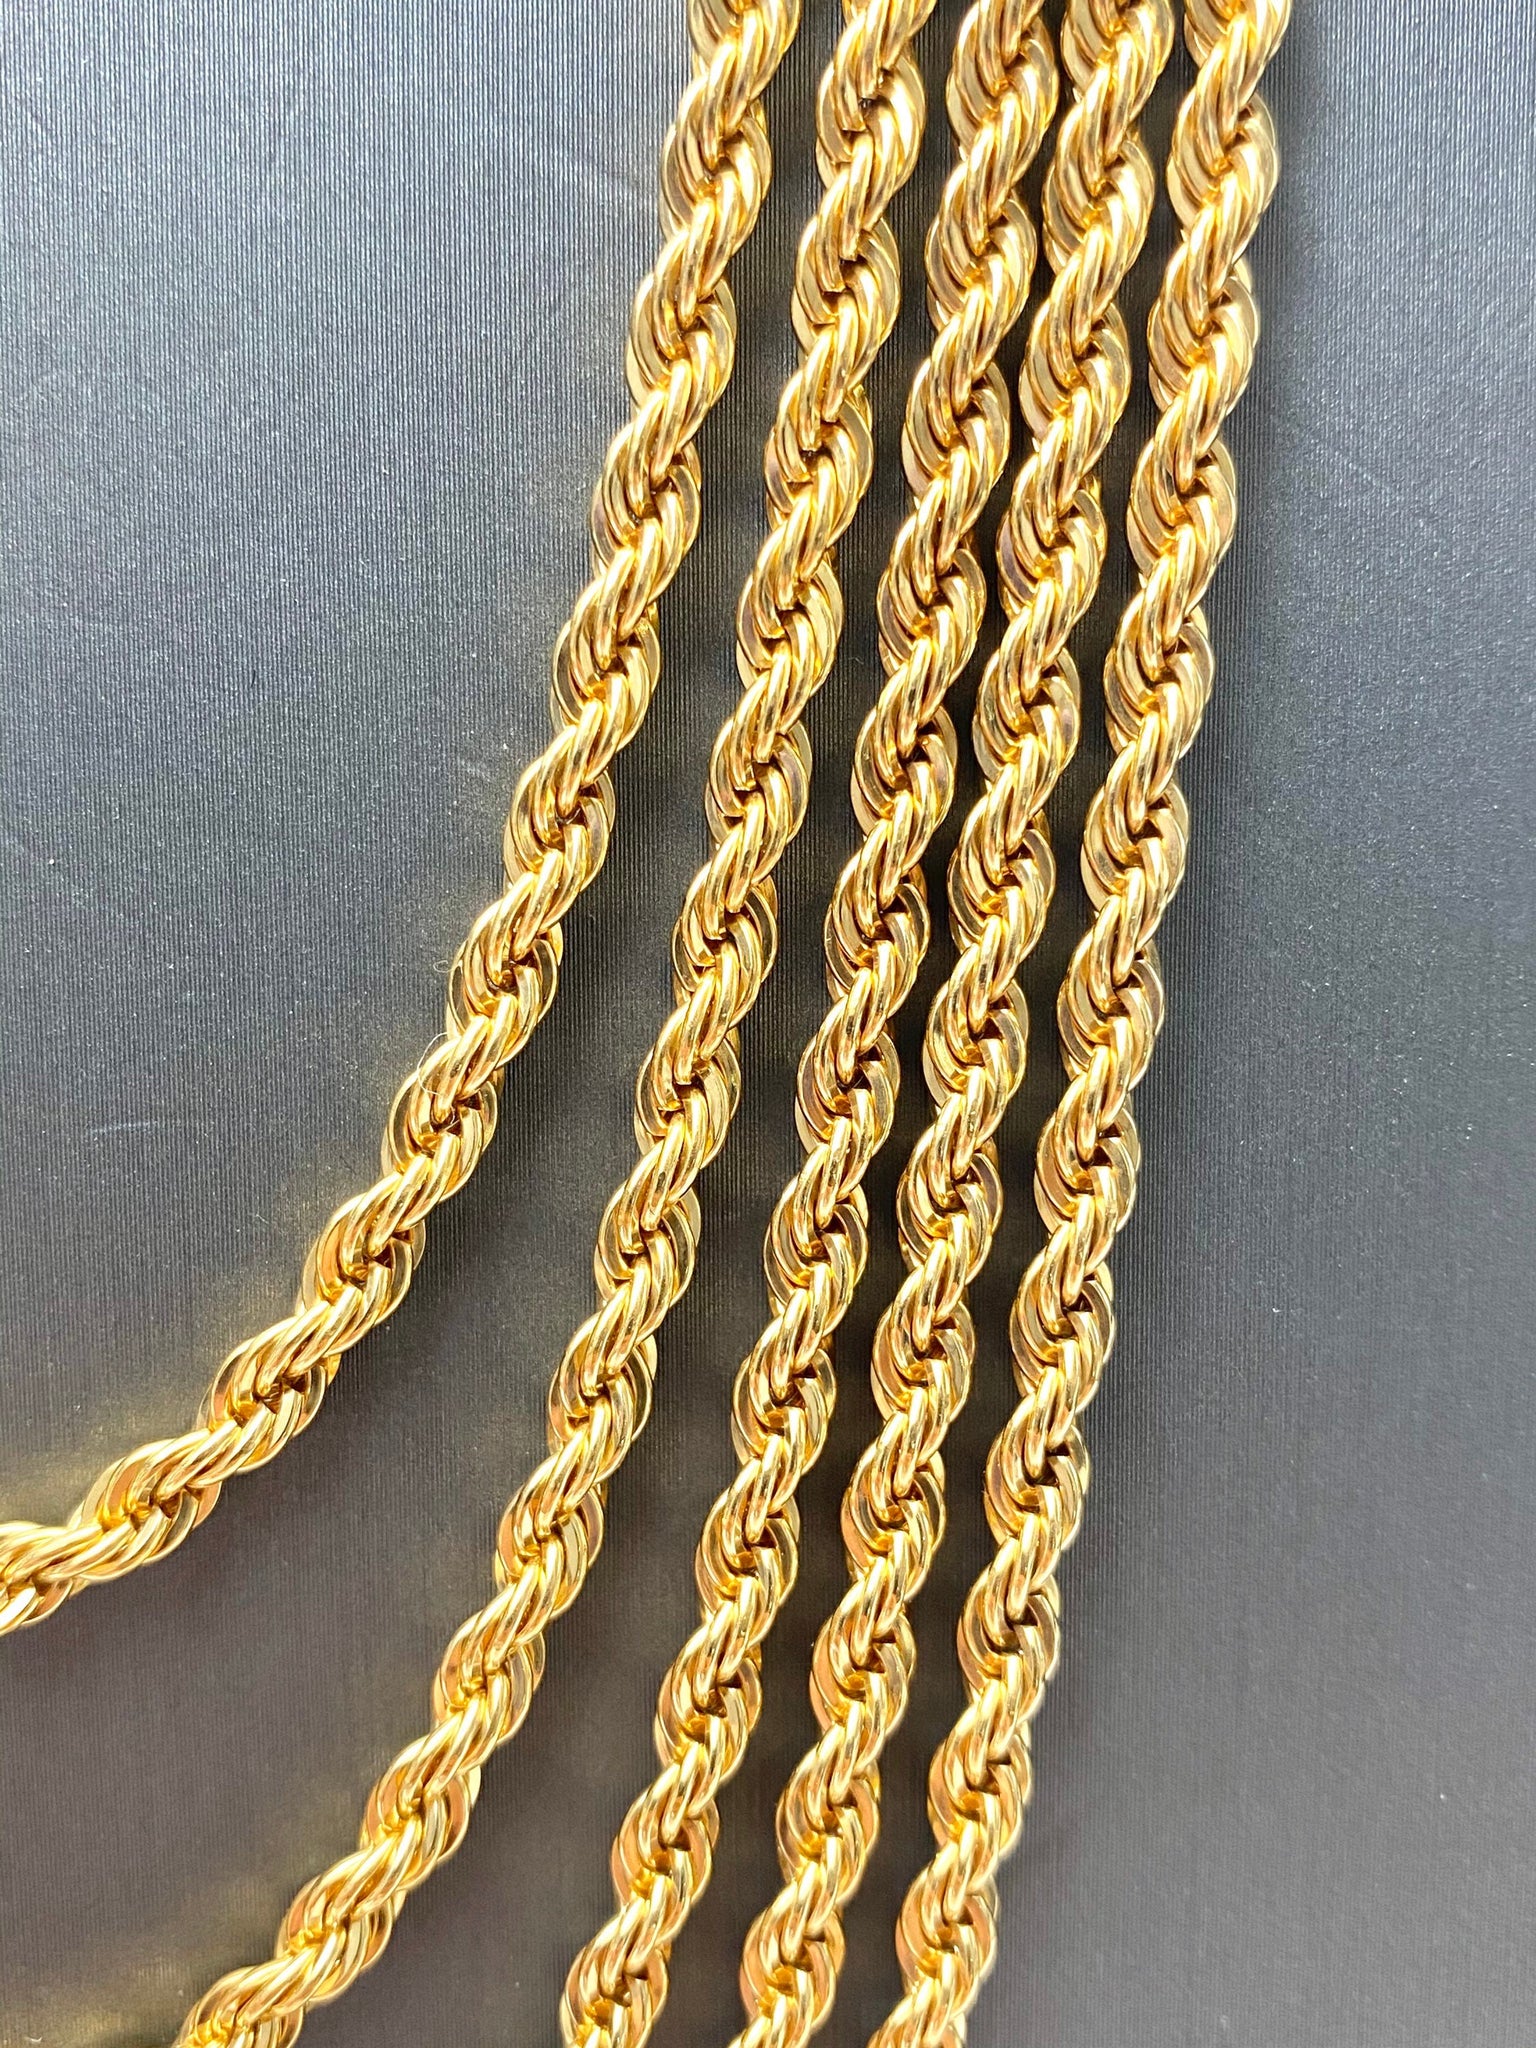 Gold Filled Chain - sold by the inch